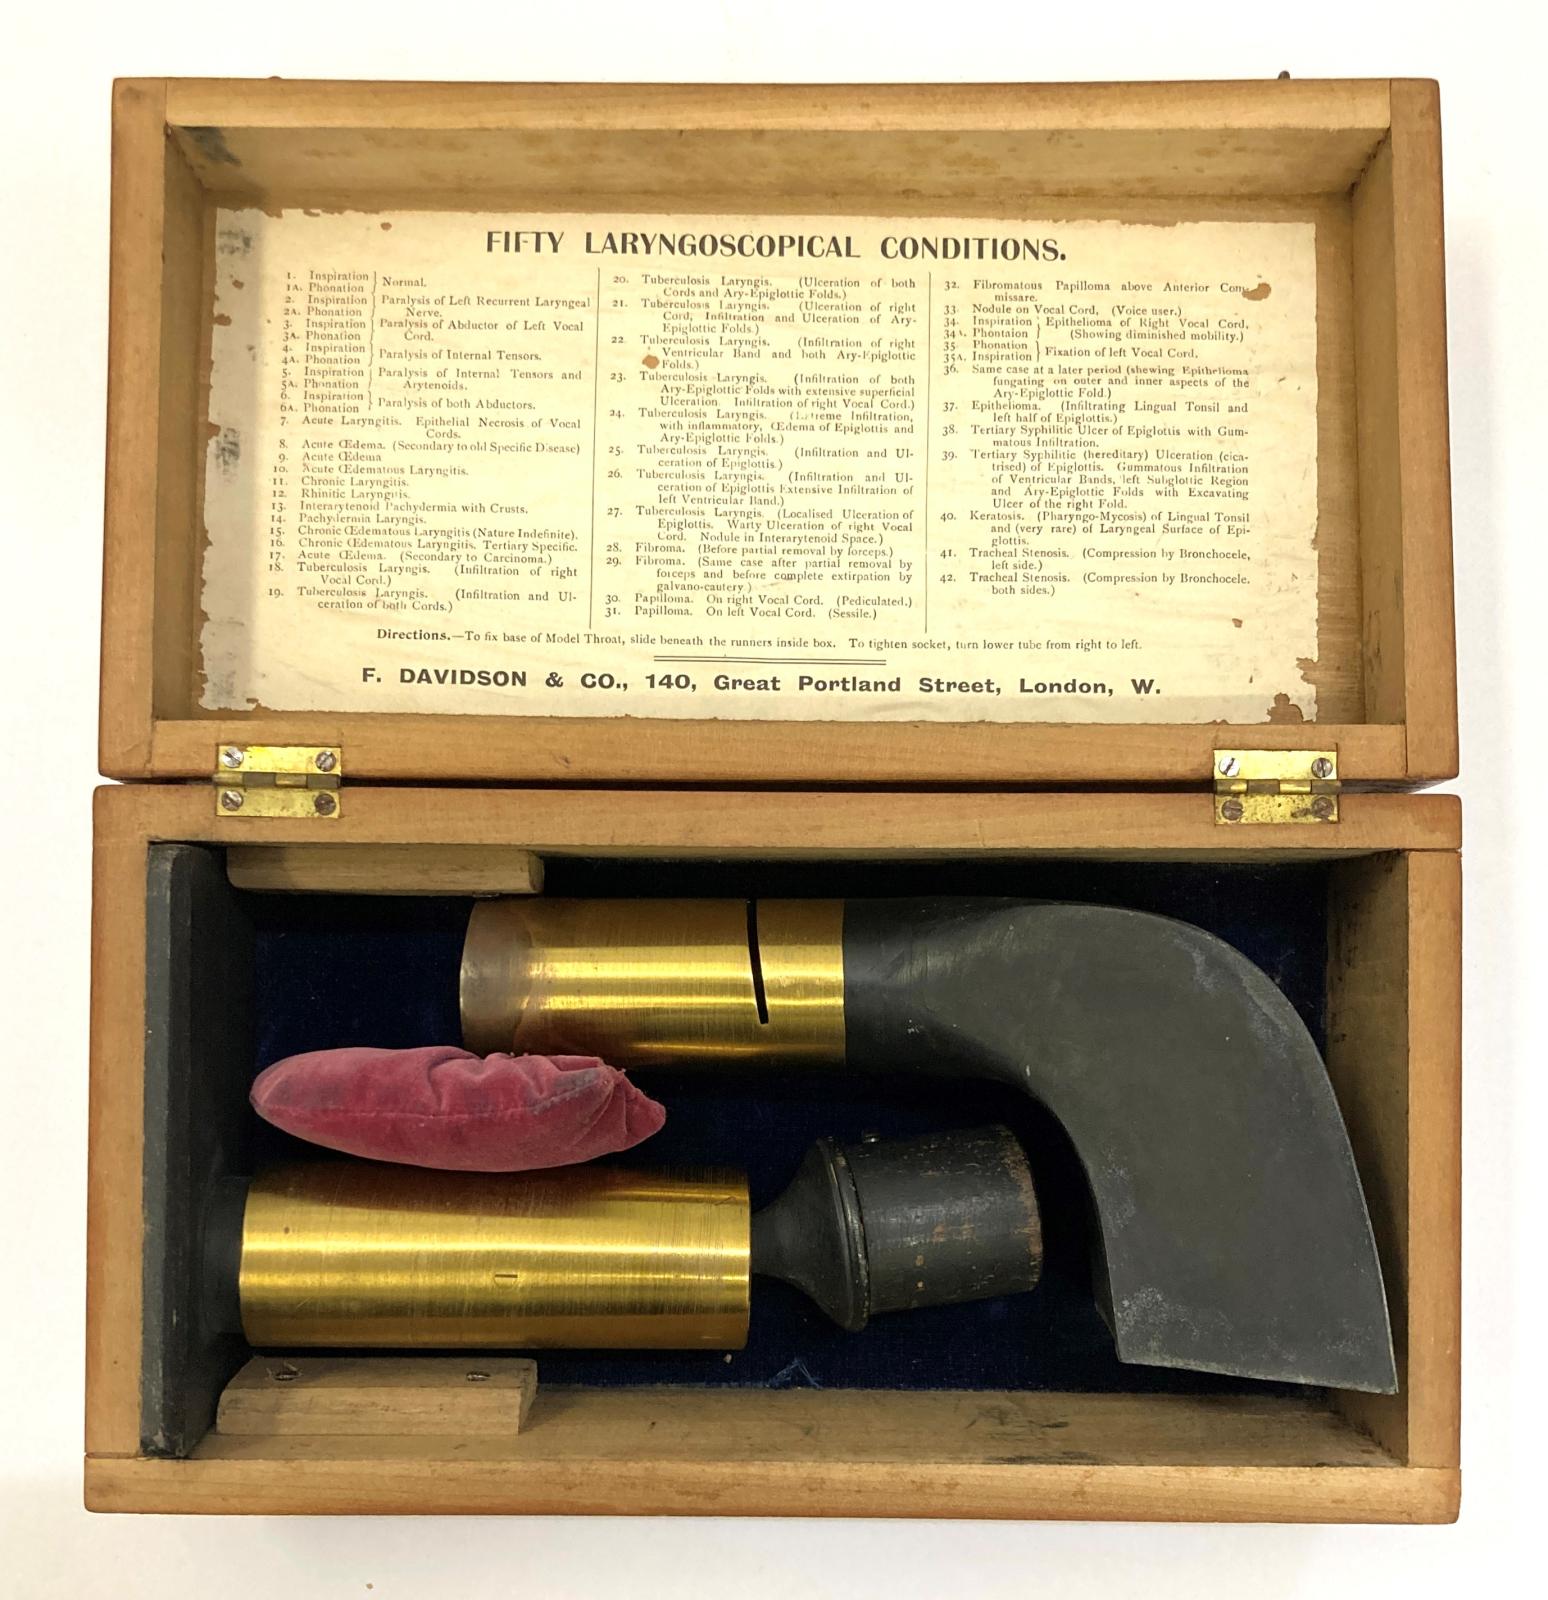 Model larynx teaching aid, dismantled and stored in wooden box